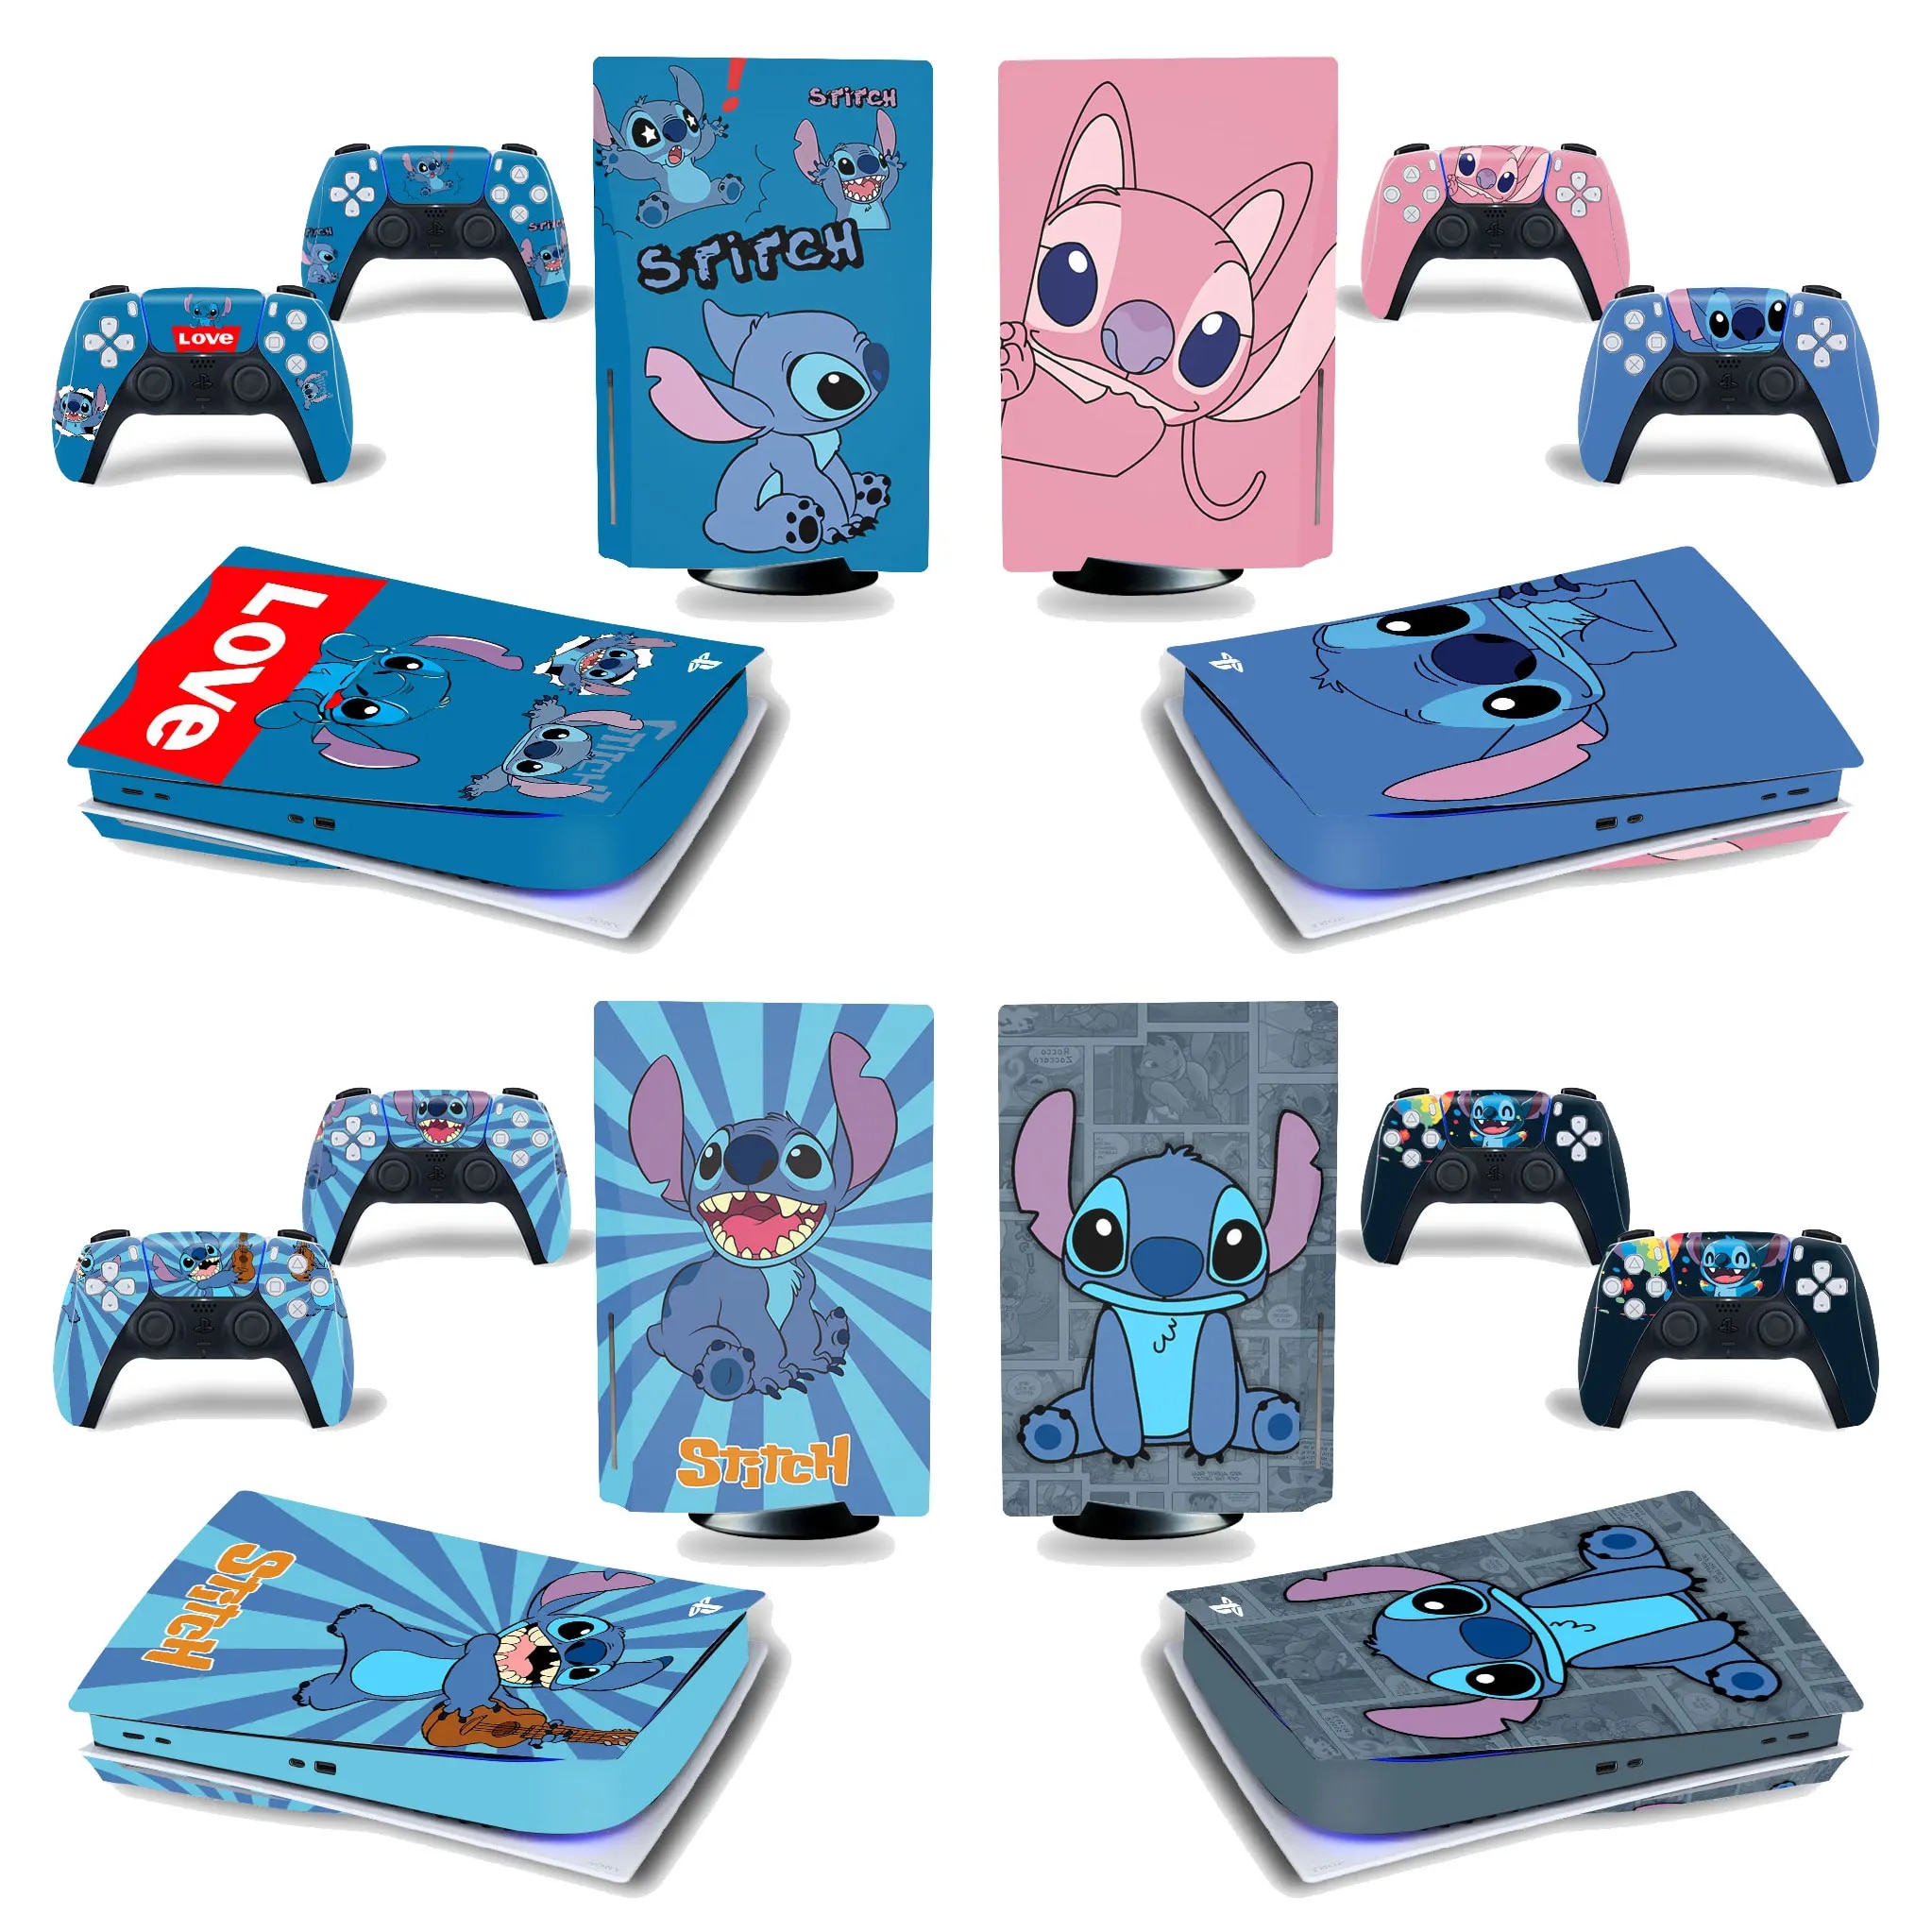 【Limited-time offer】 Cartoon Stitch Ps5 Disc Edition Skin Sticker Decal For 5 Console And 2 Controllers Ps5 Disc Sticker Vinyl